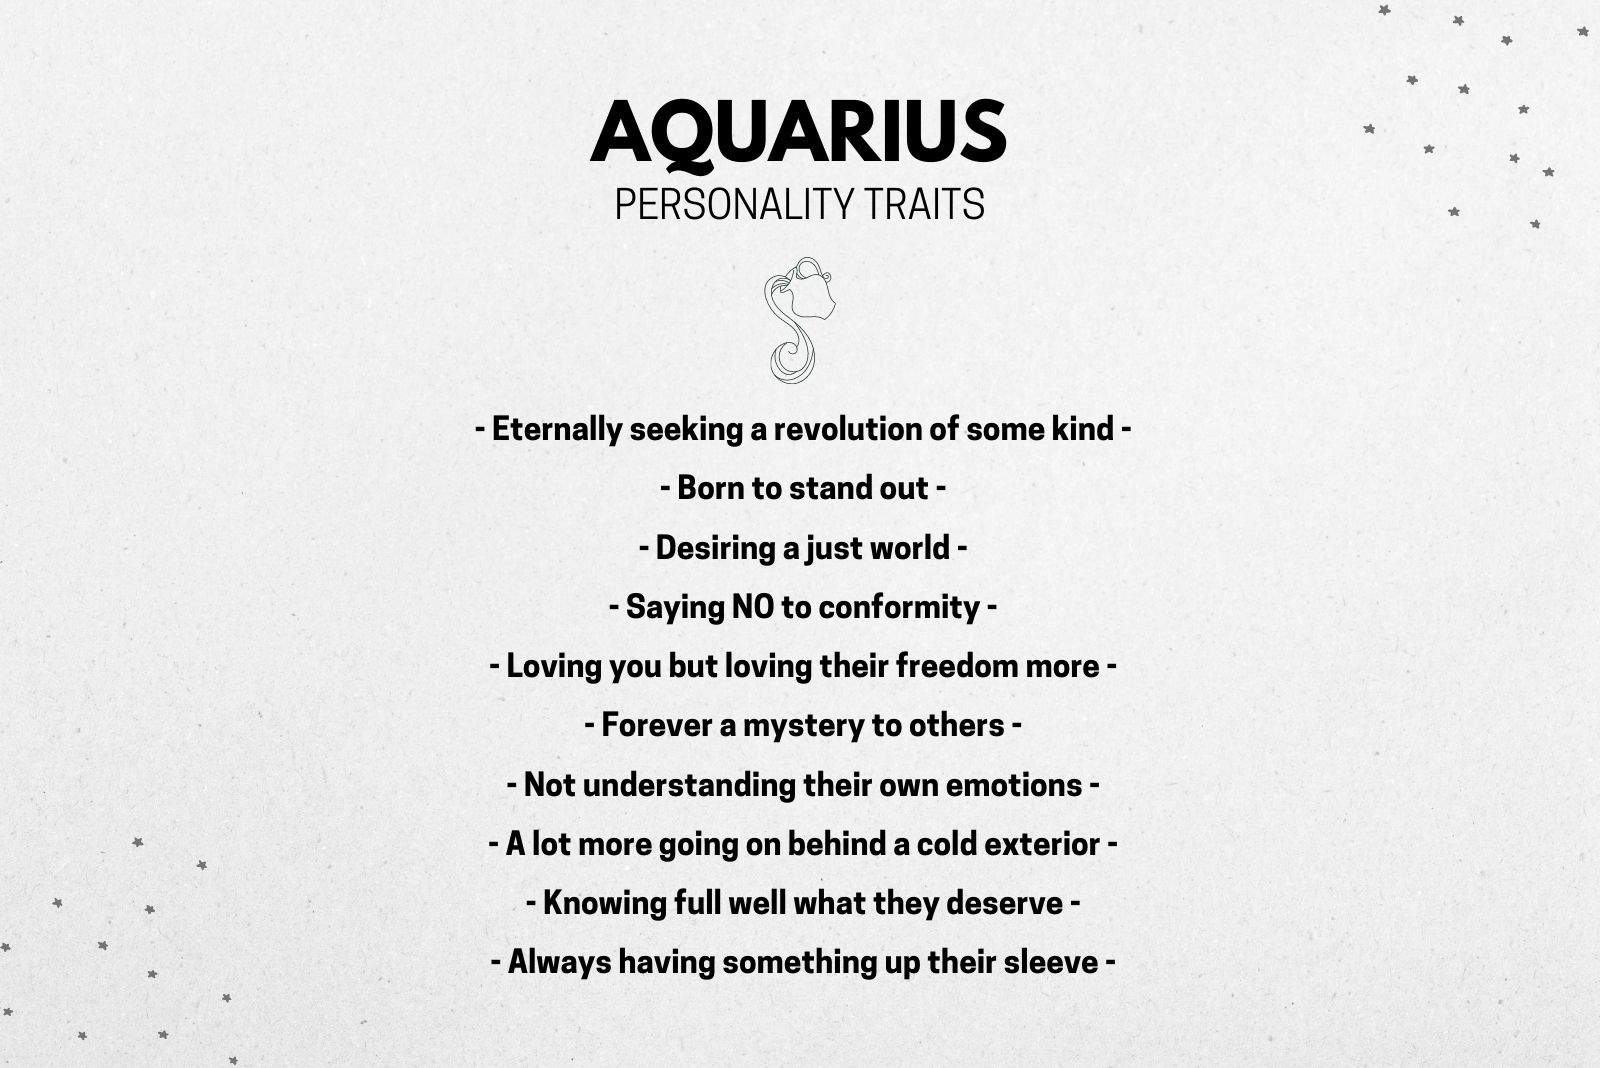 Things to know about aquarius